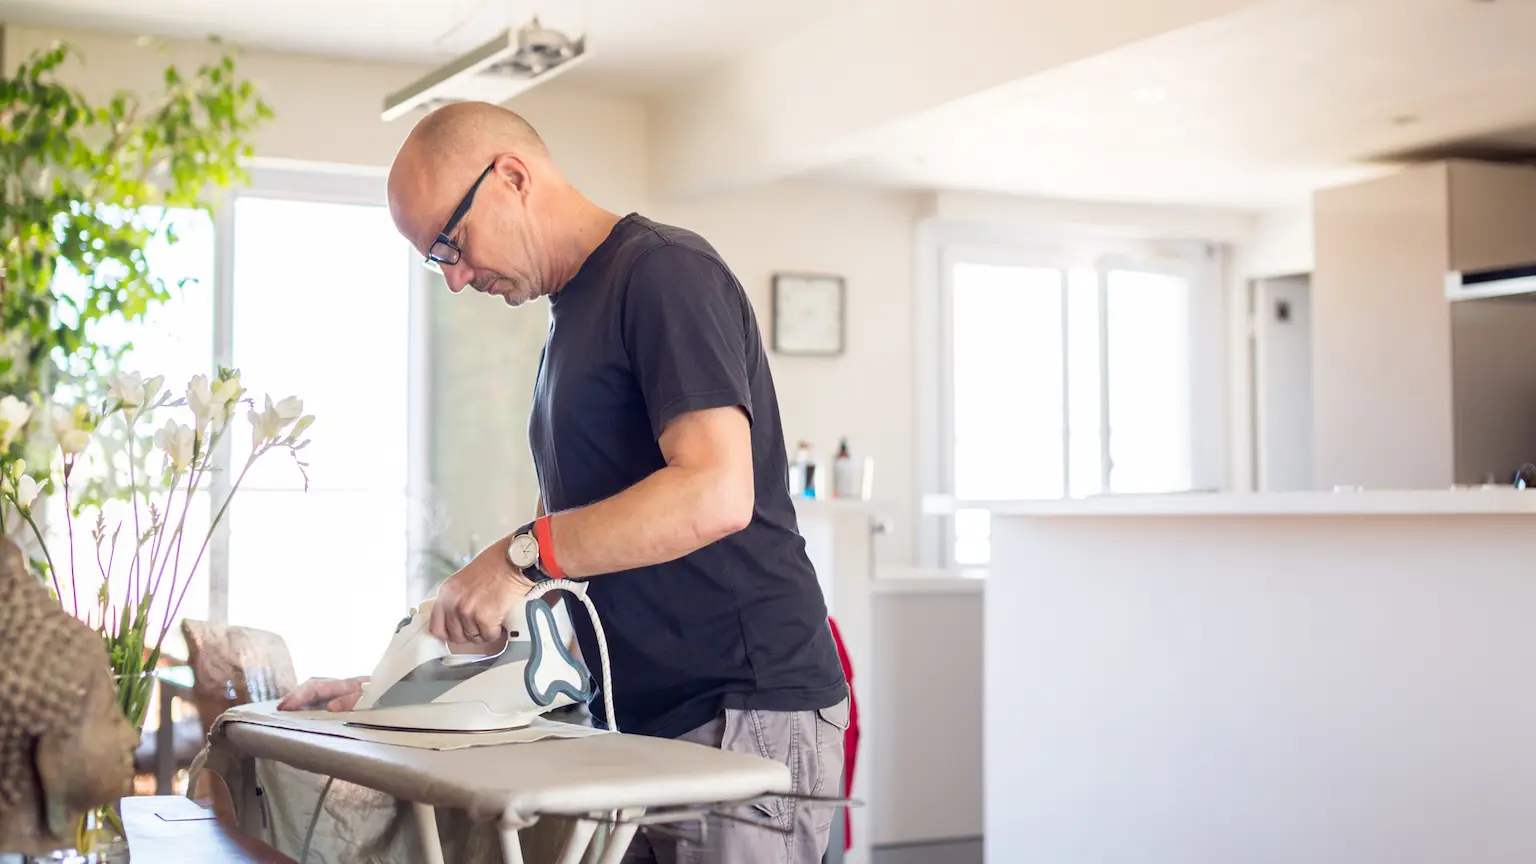 Man using an iron on an ironing board at home